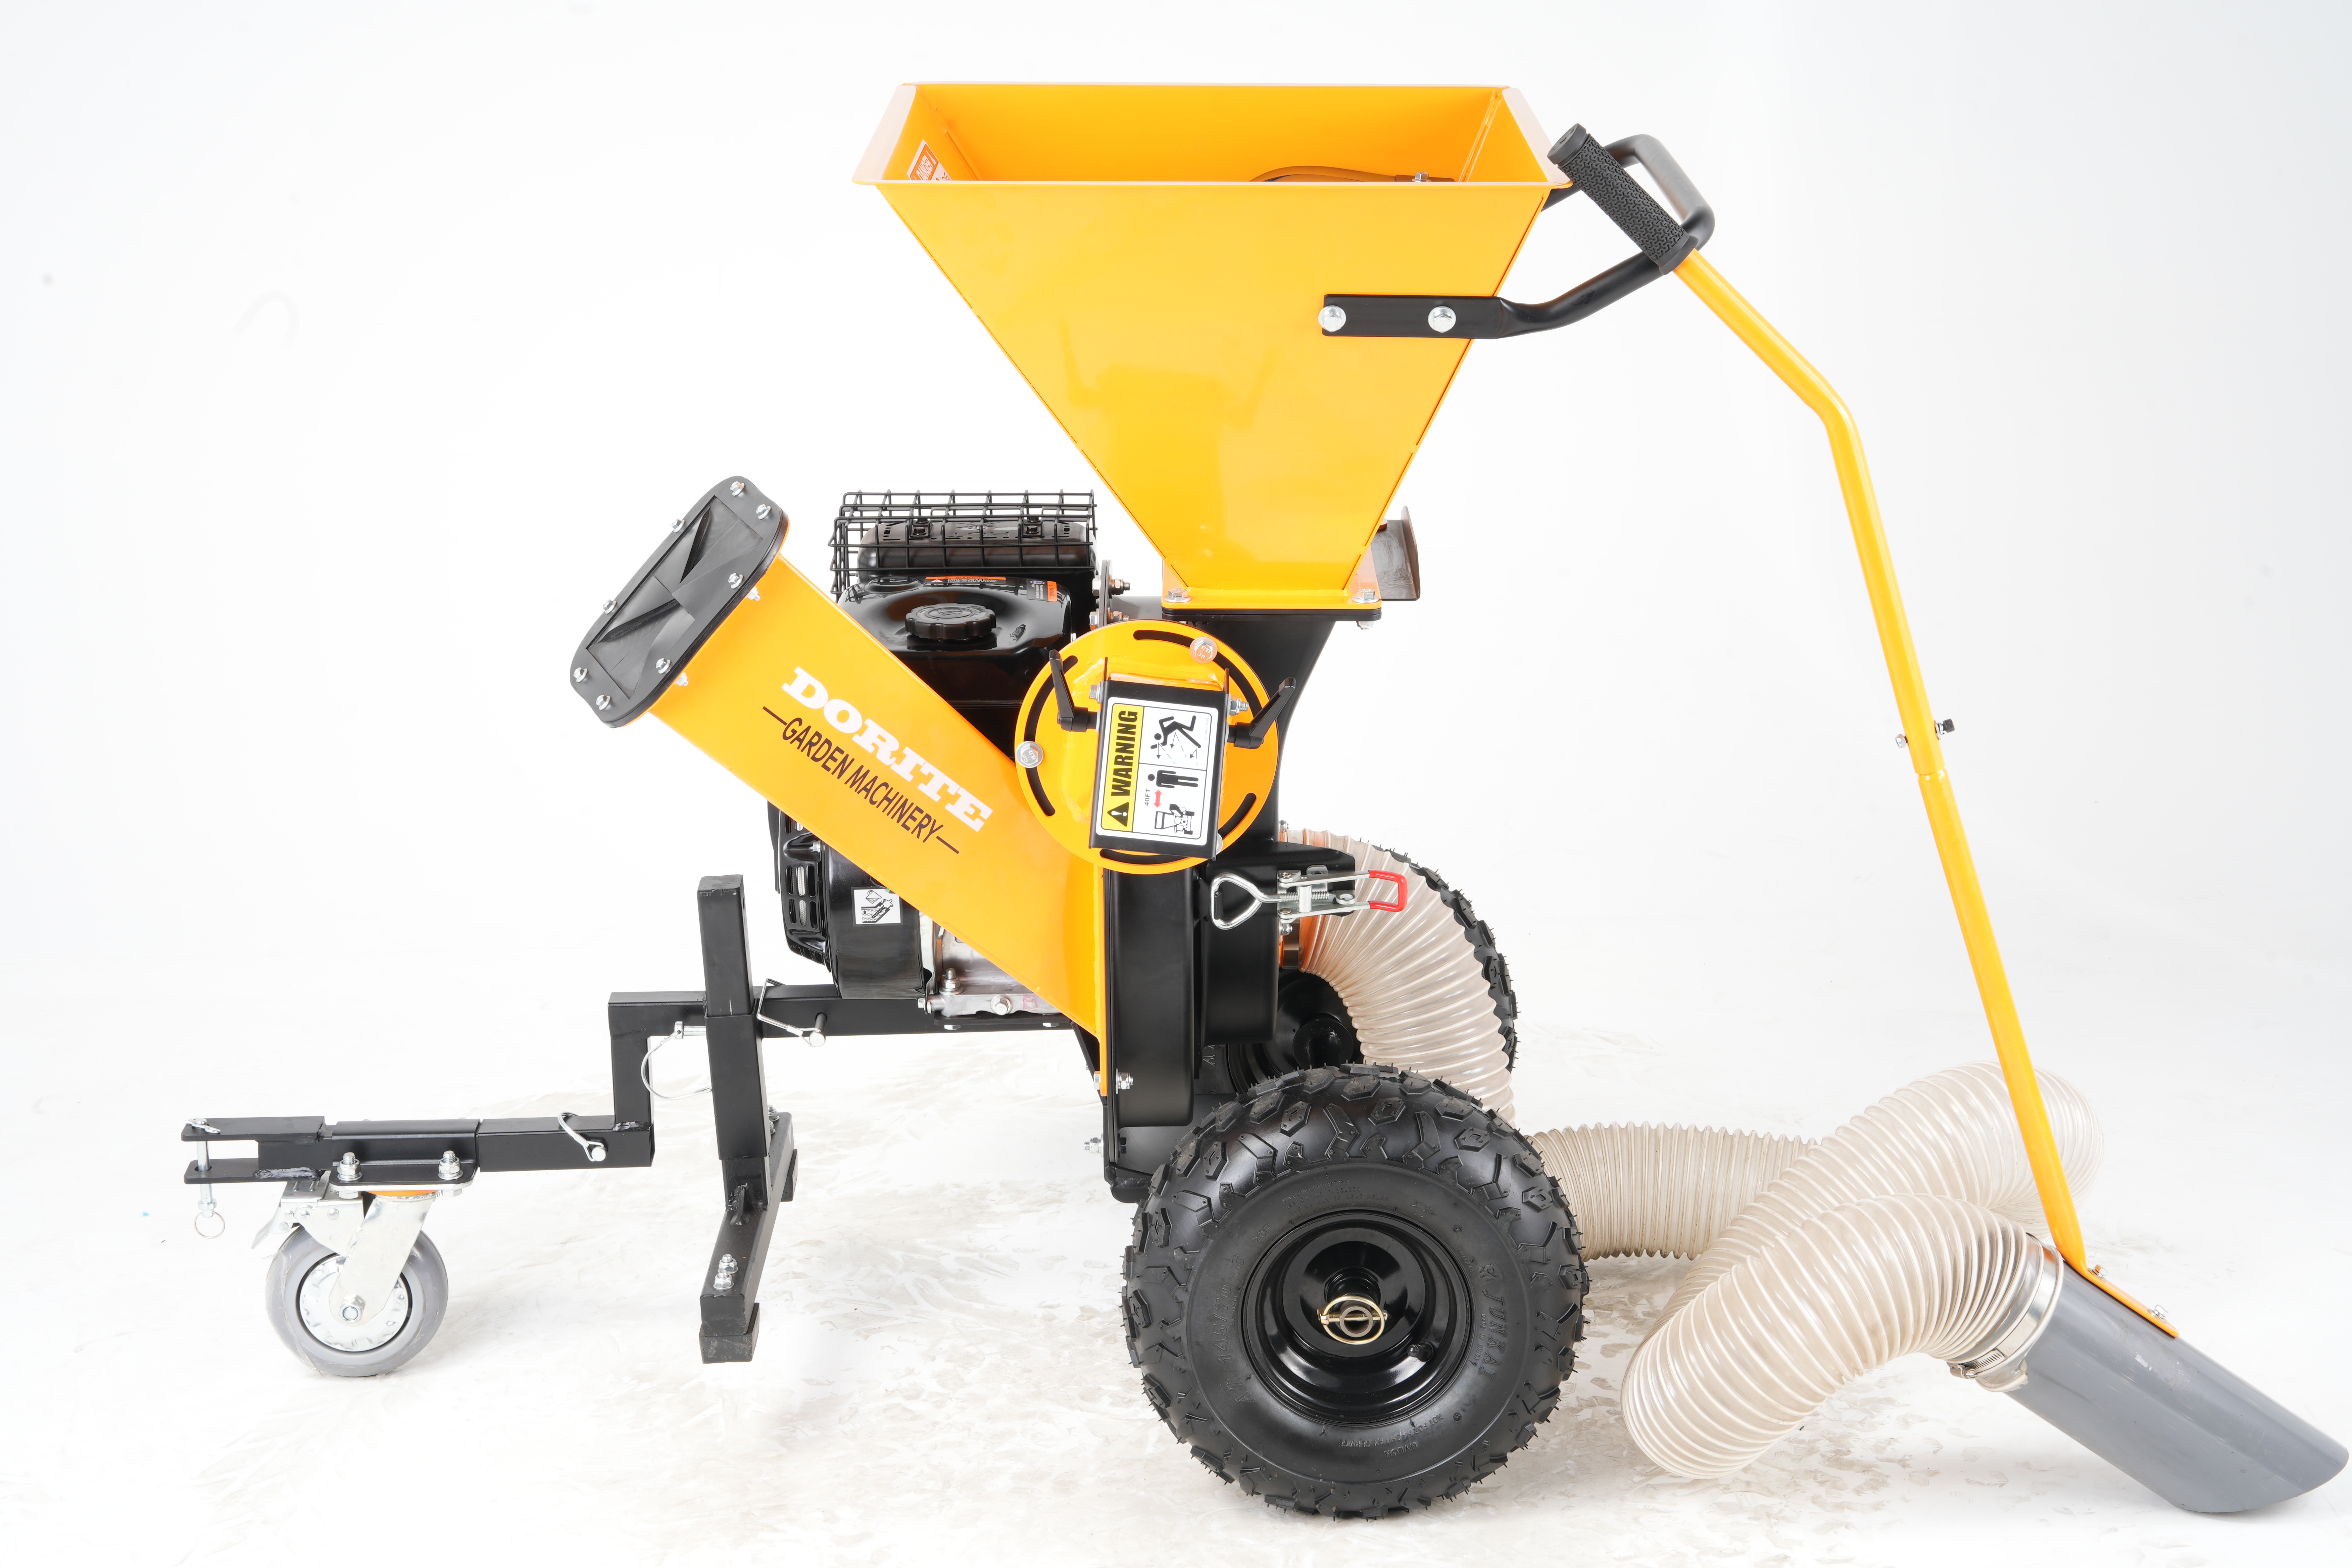 K-MAXPOWER NEW TYPE YELLOW AND BLACK COLOR 533 WOOD CHIPPER